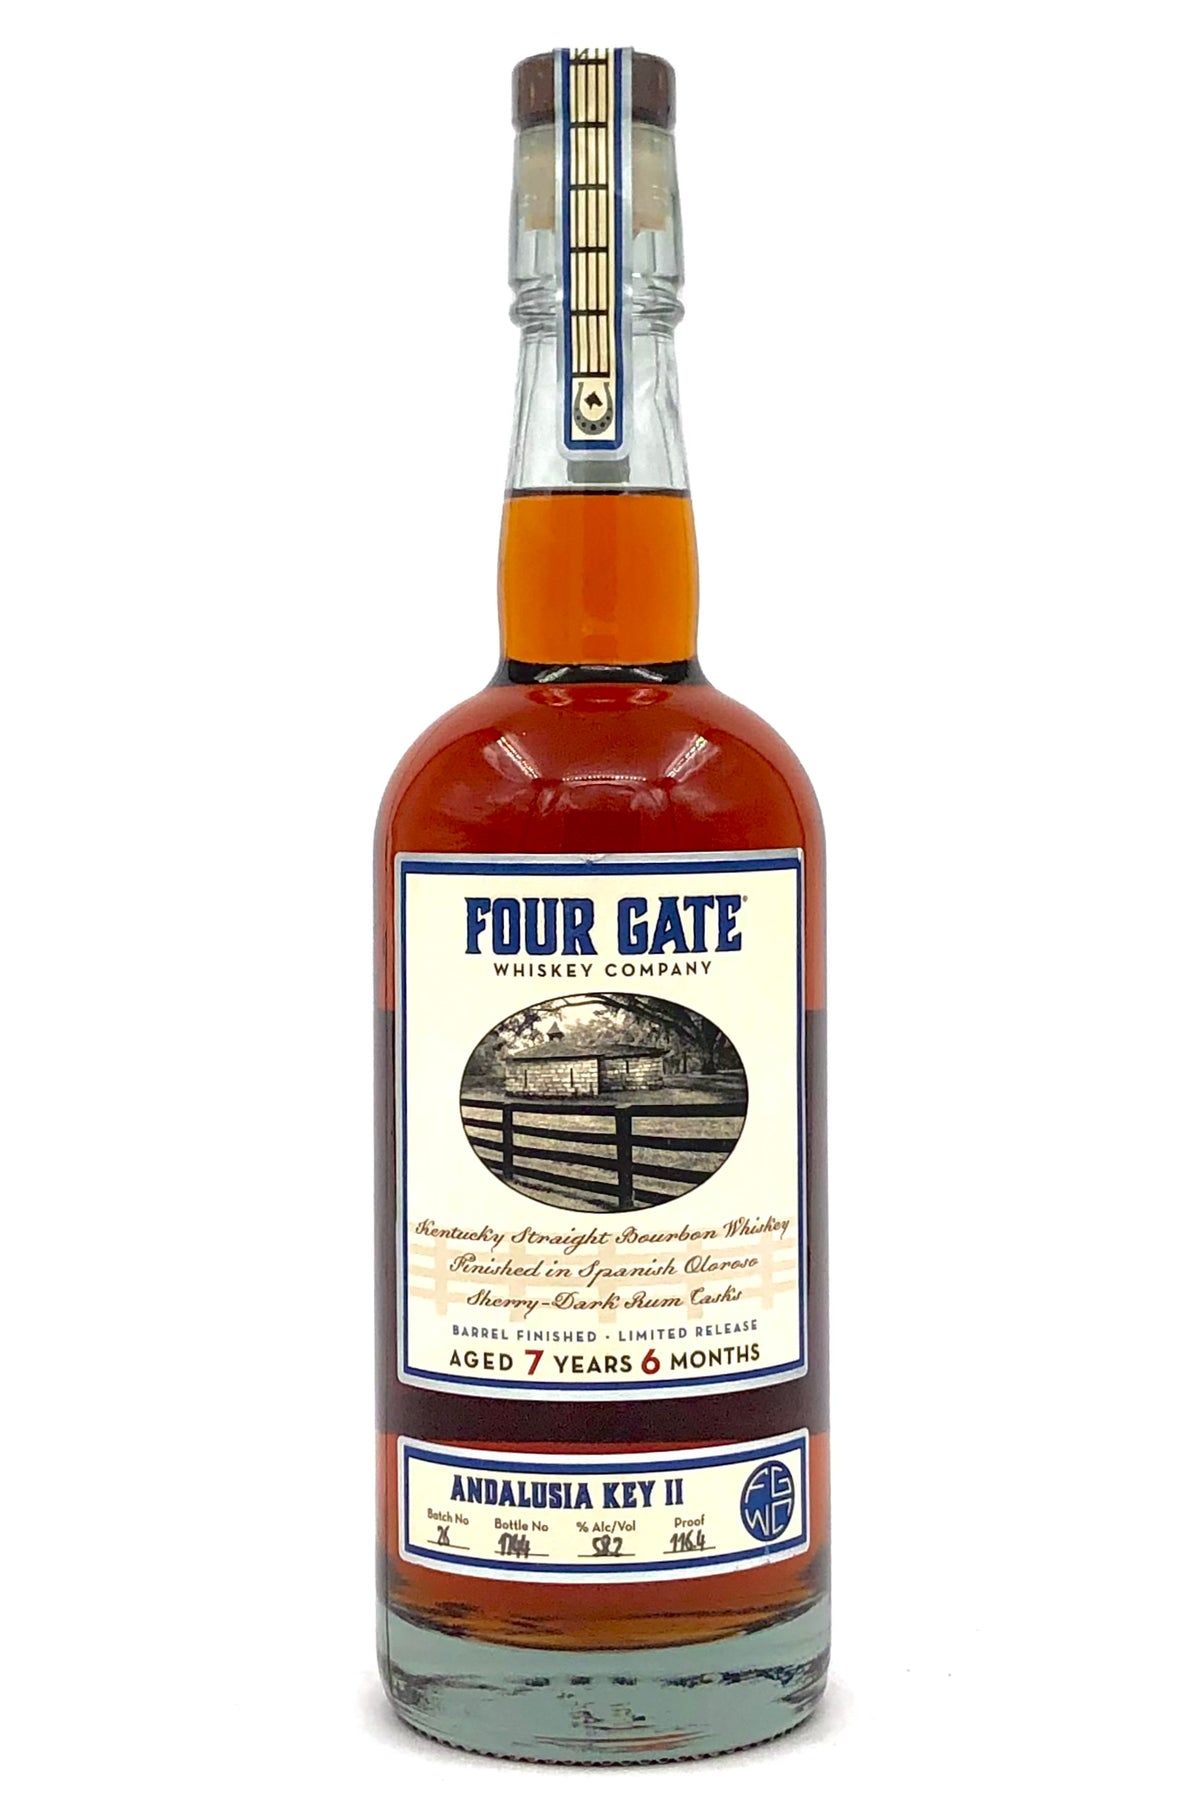 Four Gate Batch 26 Andalusia Key II Sherry Rum Casks Finished Bourbon Whiskey